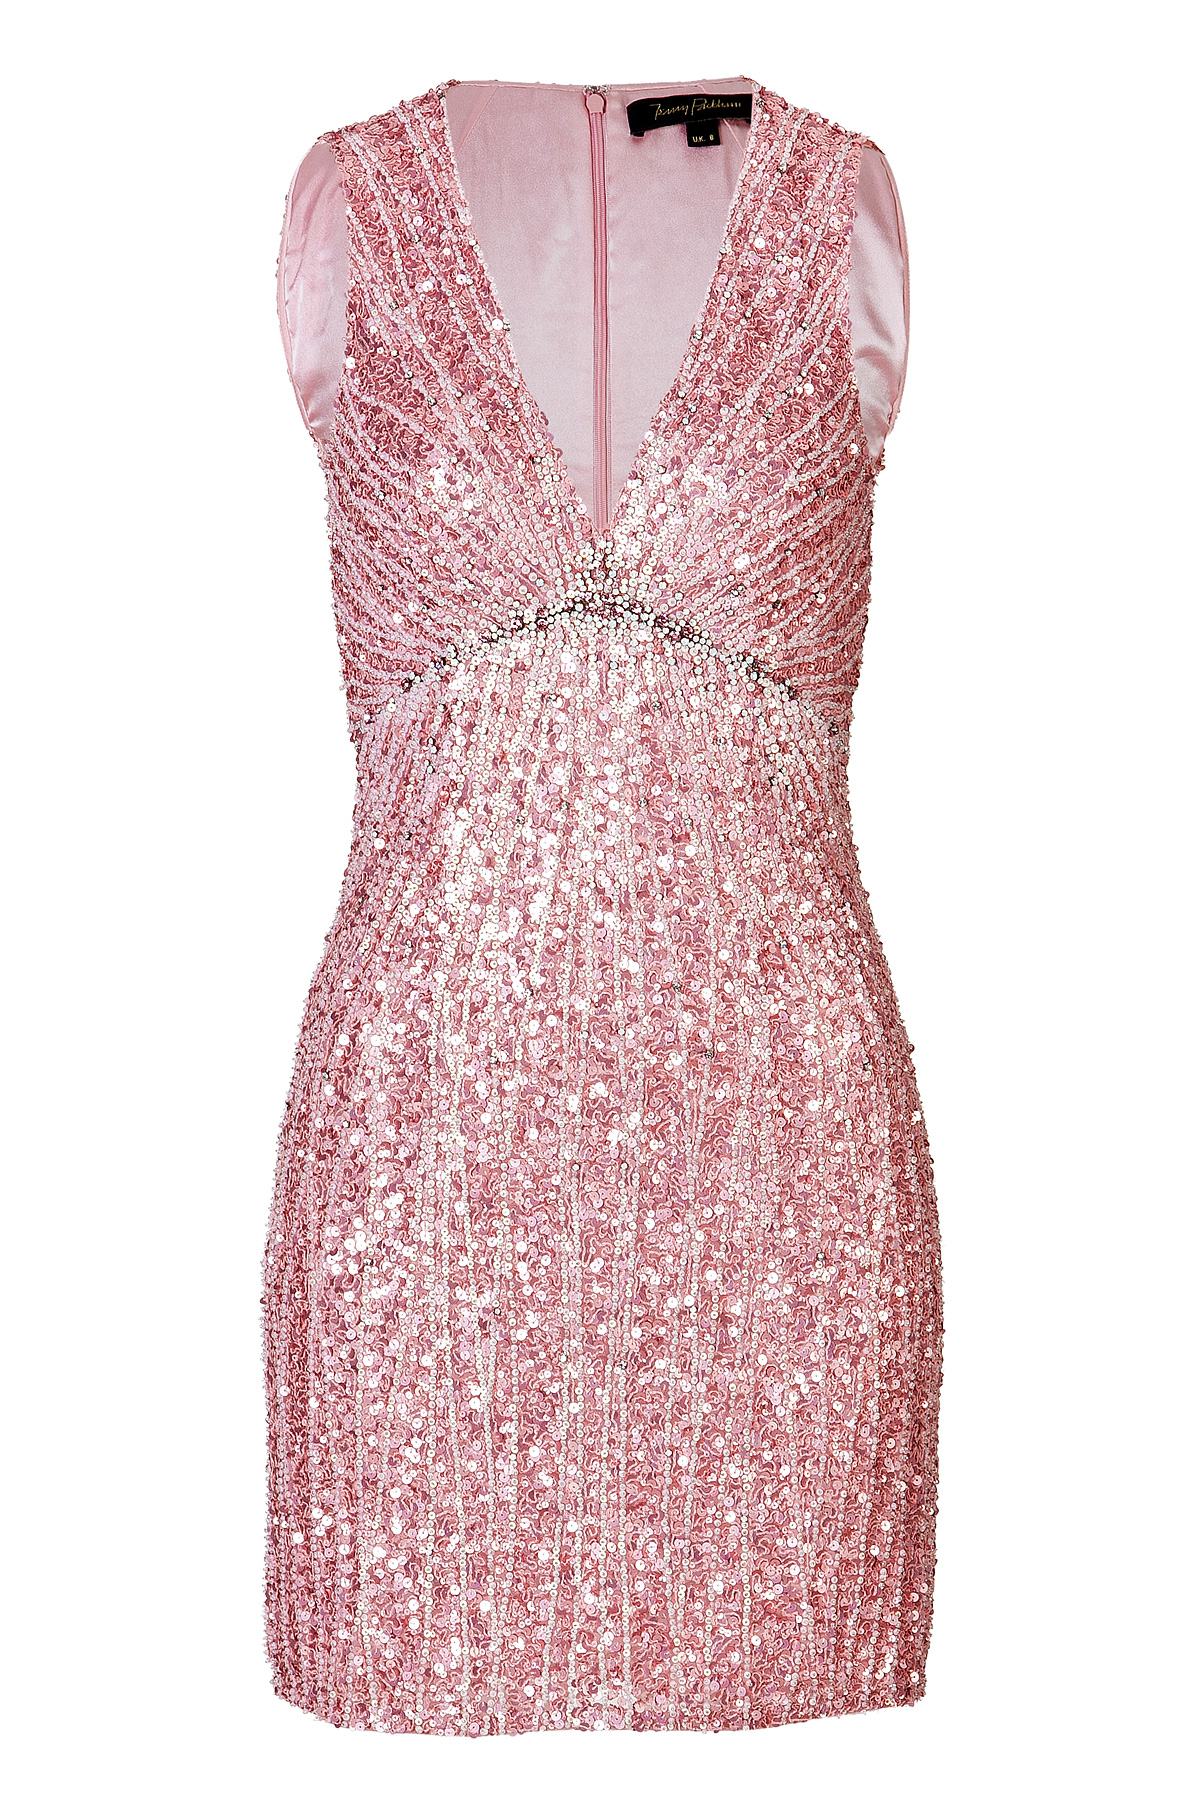 Jenny packham Sequined Sheath Dress in Pink | Lyst